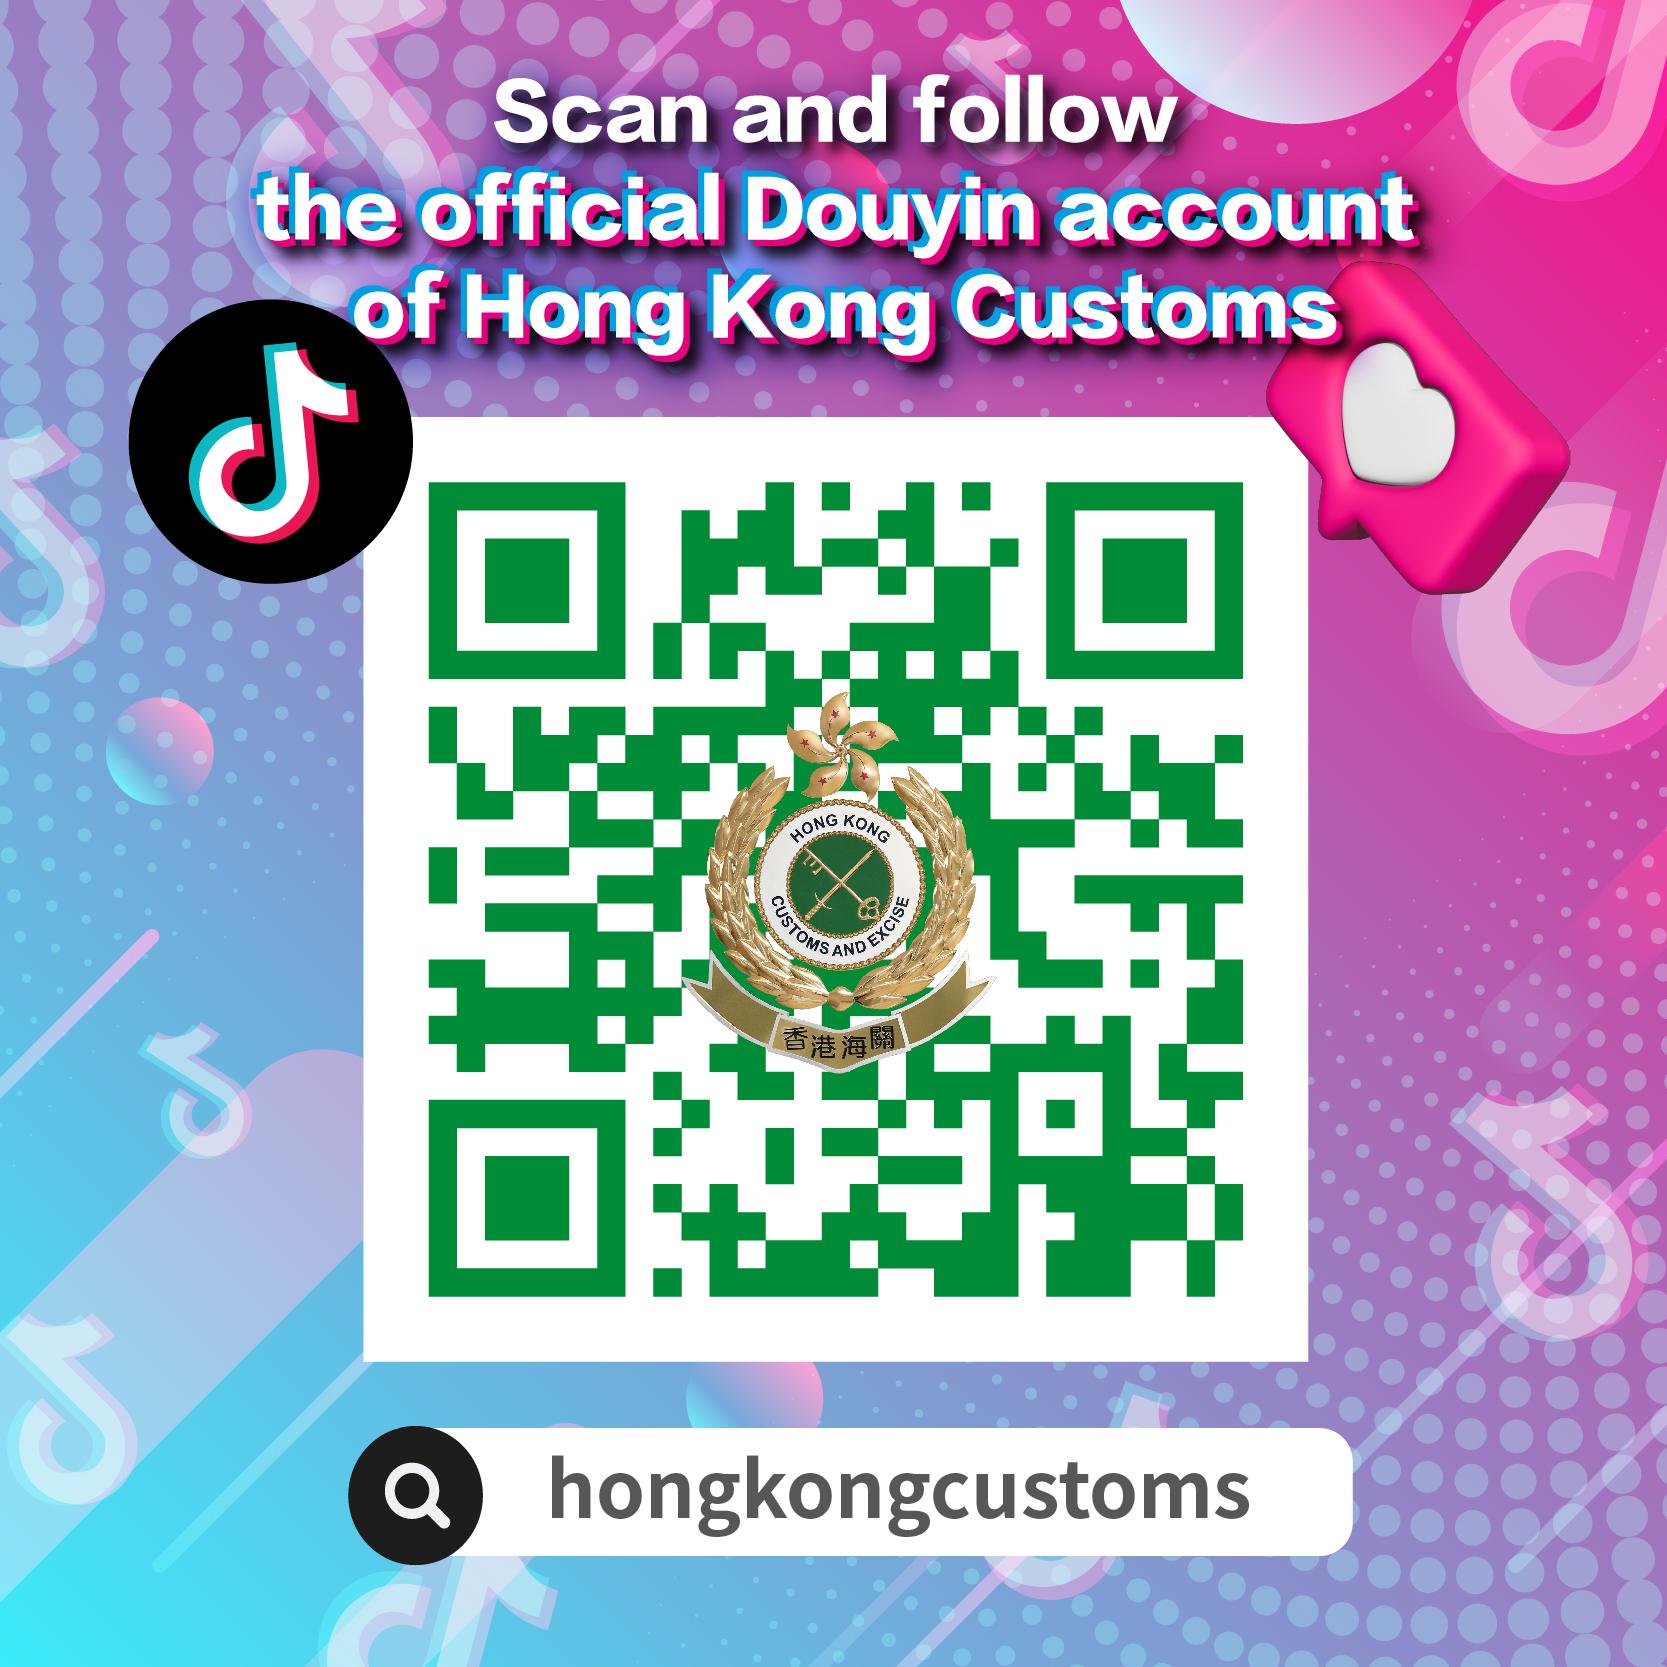 Hong Kong Customs launched its official Douyin account today (April 26). A promotional video featuring the Commissioner of Customs and Excise, Ms Louise Ho, has been produced specifically as a prelude to the launch. Photo shows the QR code of Hong Kong Customs' Douyin official account.